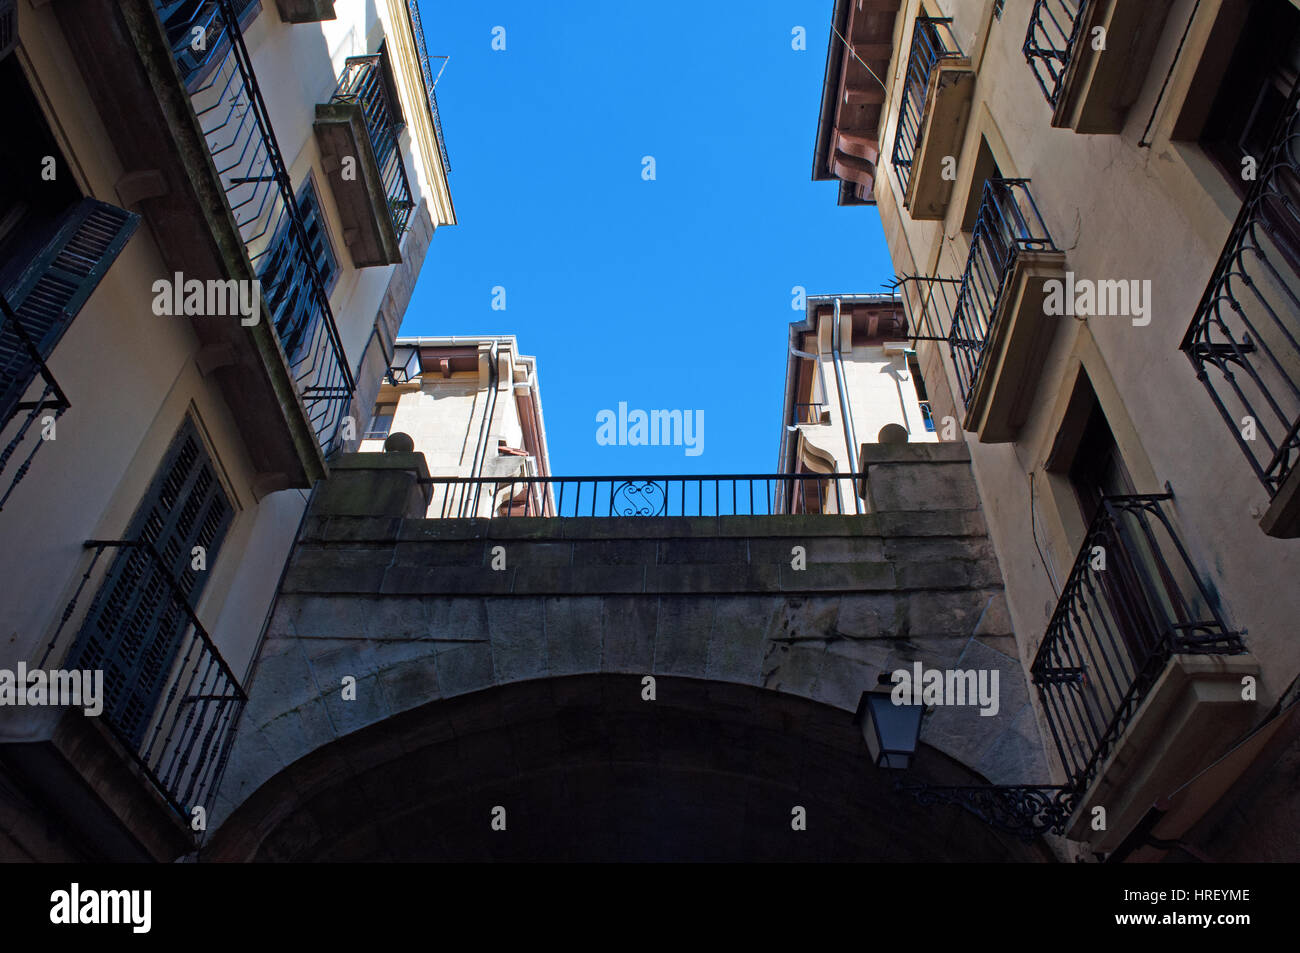 Donostia-San Sebastian, Basque Country: view of the palaces and the alleys of the Parte Vieja, the Old Town and the original nucleus of the city Stock Photo